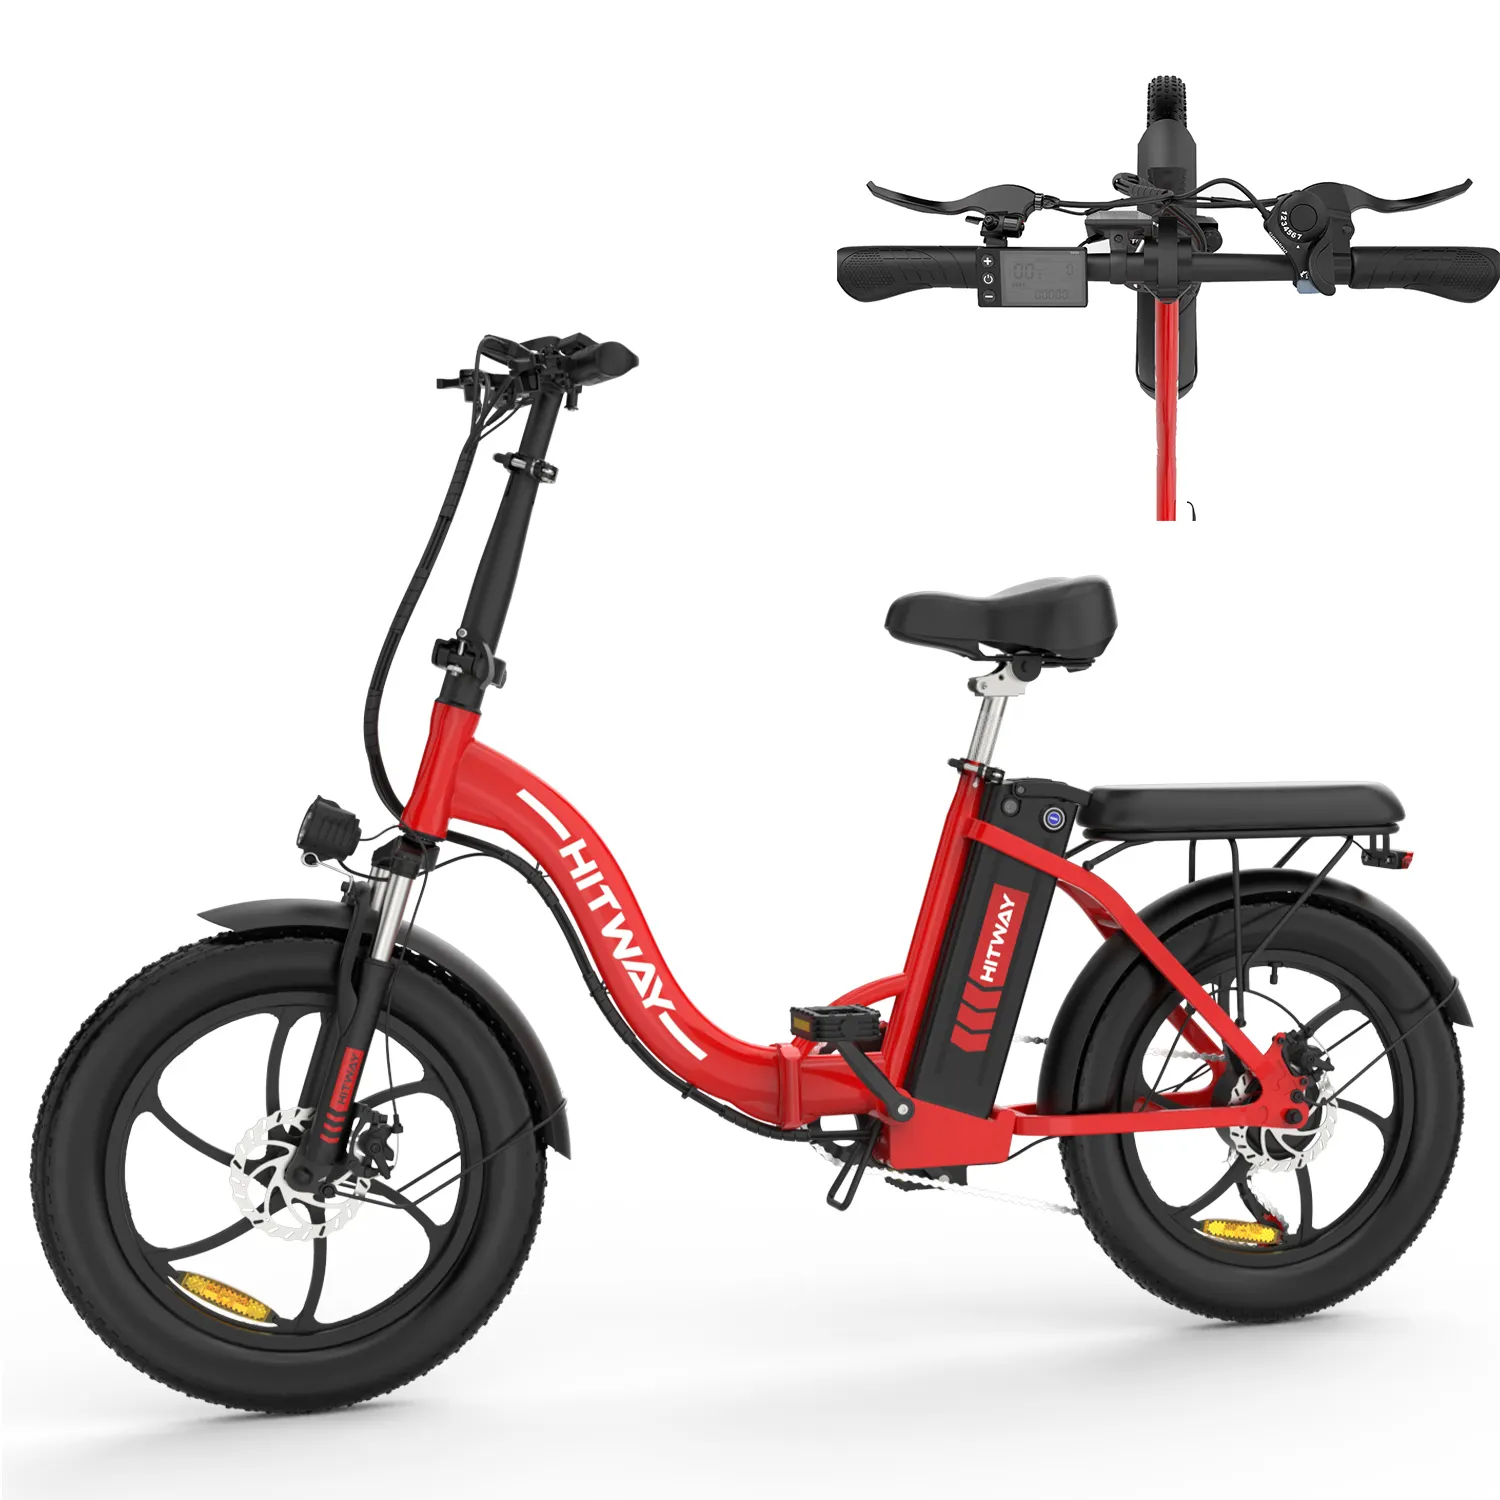 HITWAY EU Warehouse Stock E- Bike Hot Sale 20INCH 250W 36V Foldable Removable Battery Electric Mountain Bicycle